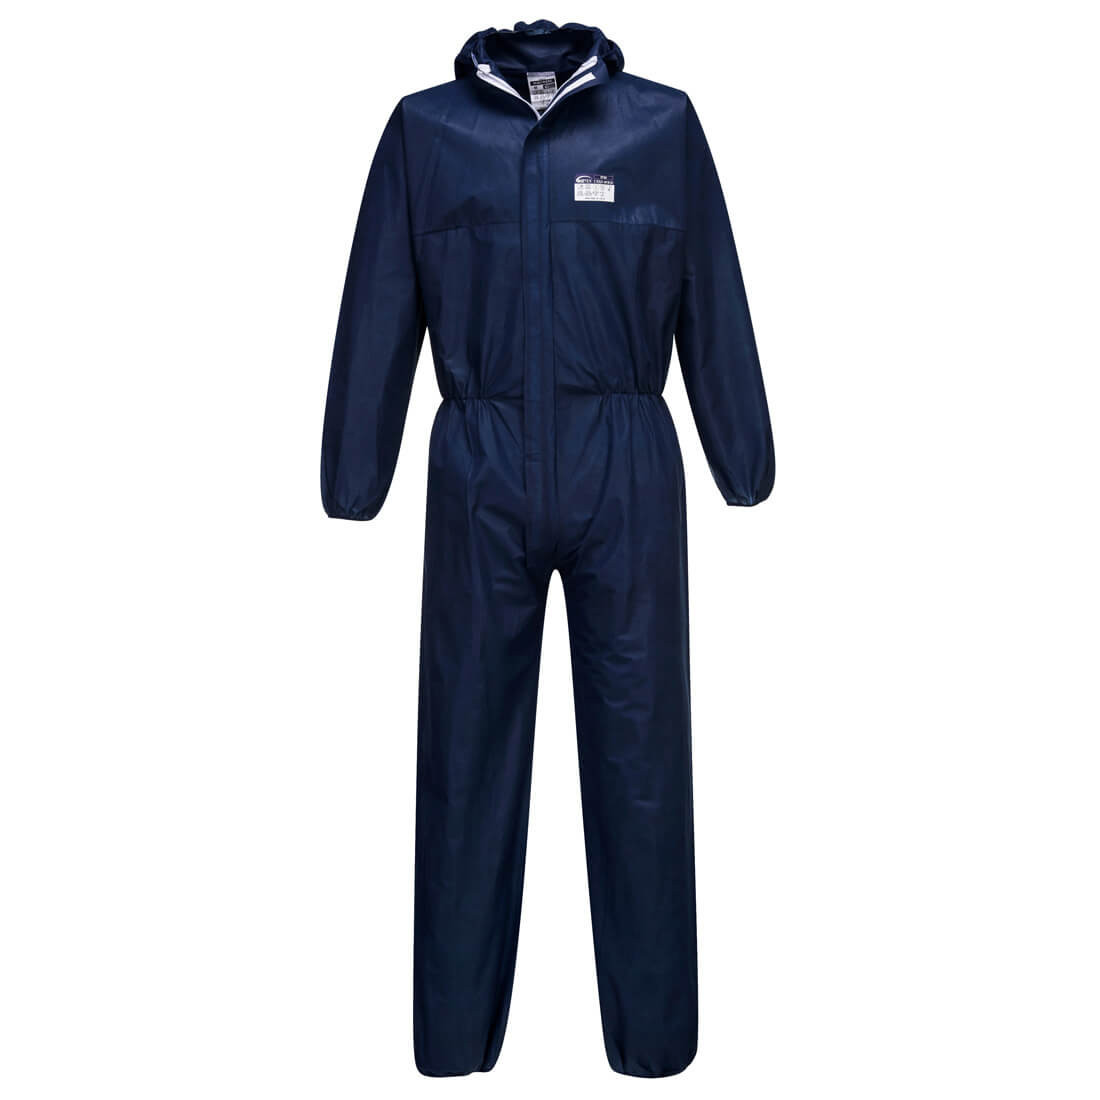 BizTex® SMS Coverall Type 5/6 - Personal protection